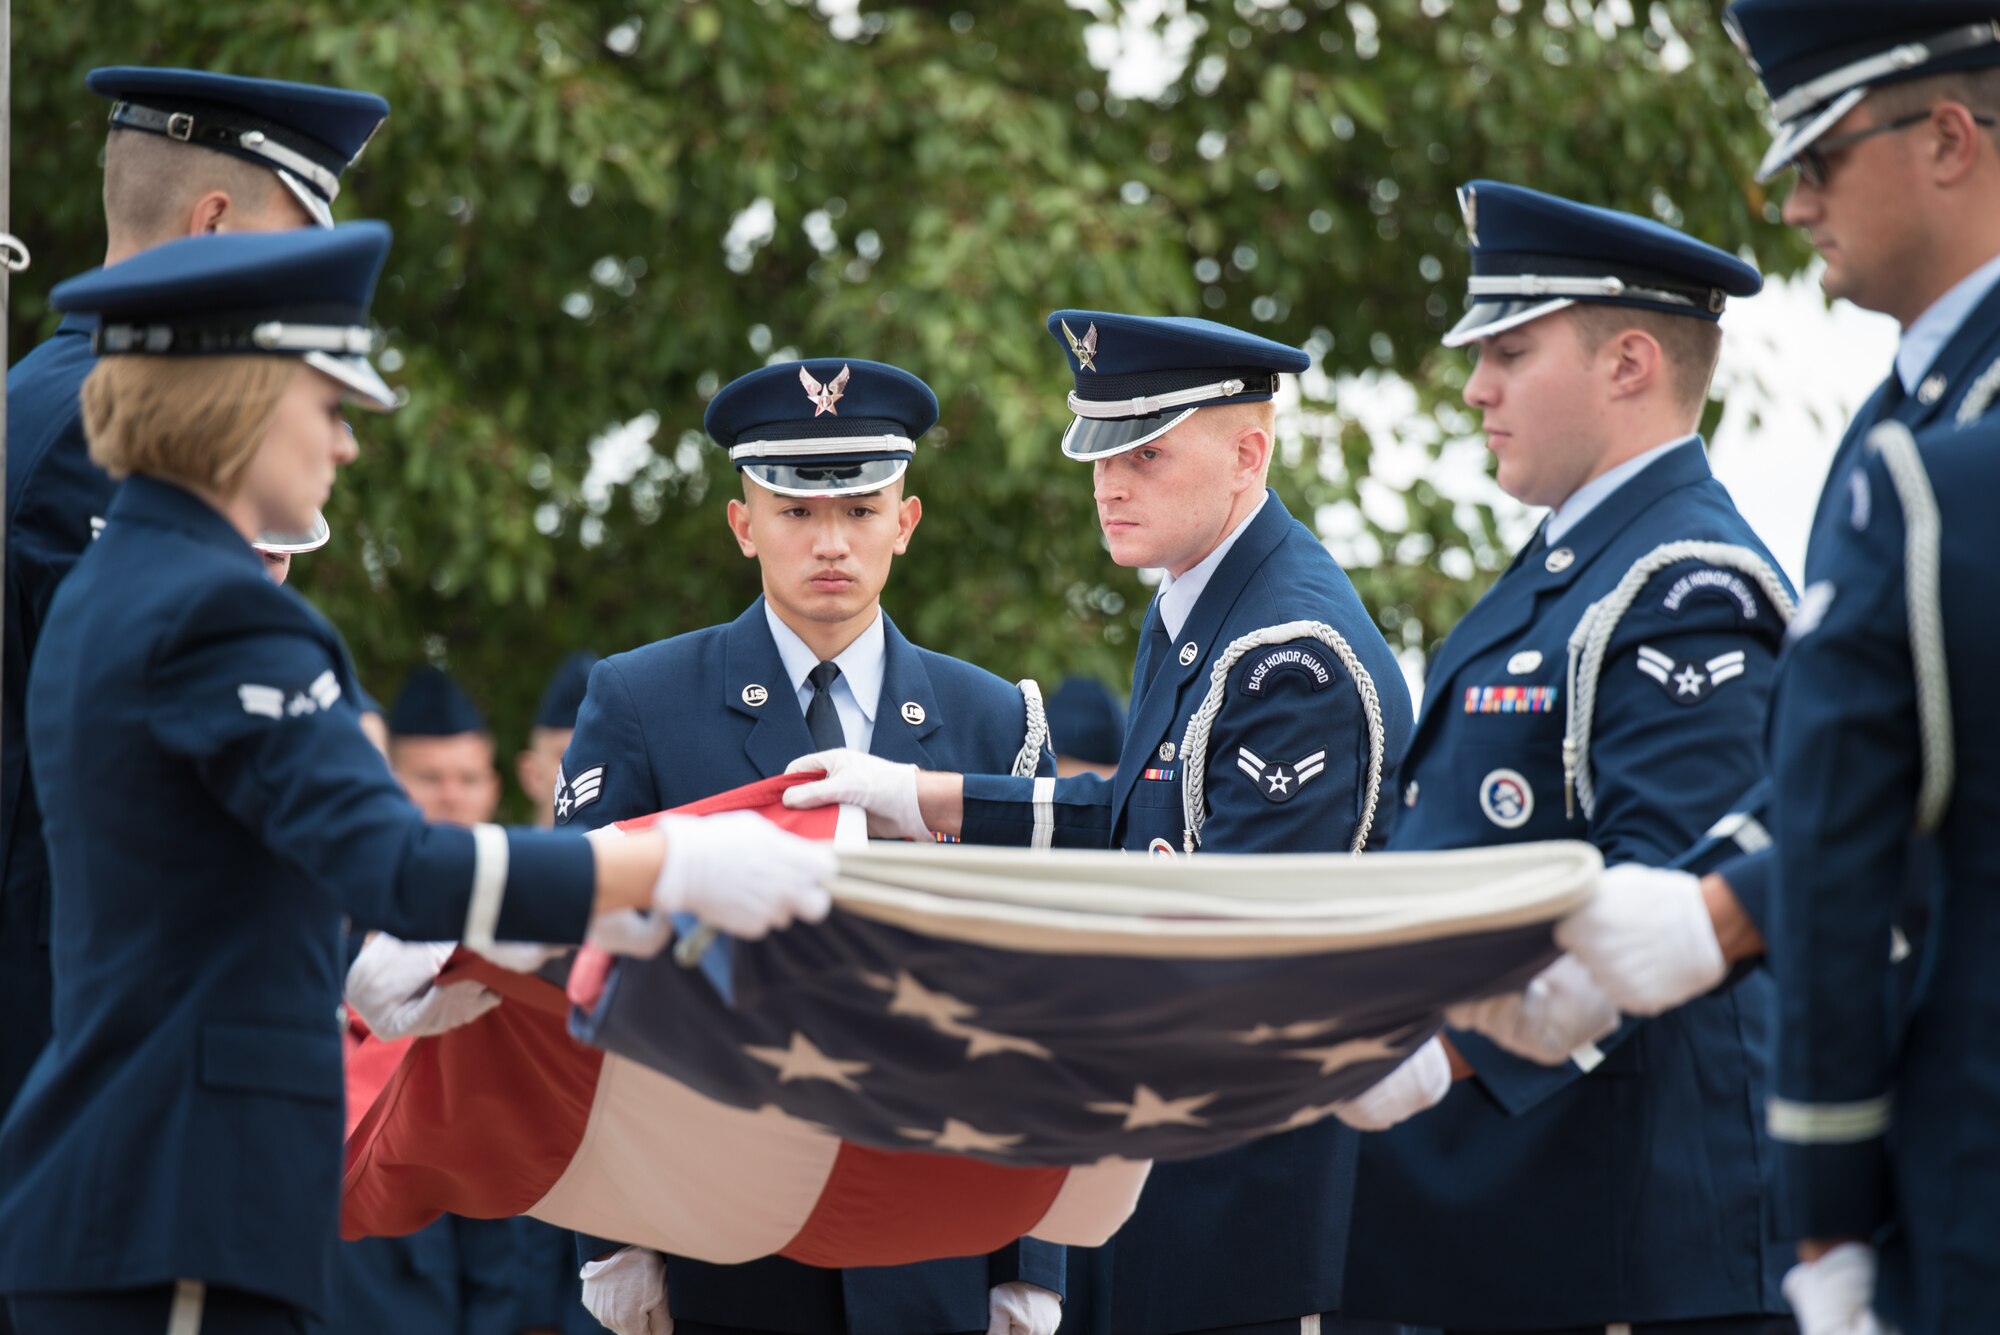 McConnell's Honor Guard flag detail folds the American flag during the 2019 prisoner(s) of war/missing in action Retreat Ceremony Sept. 20, 2019, at McConnell Air Force Base, Kan. The installation honored those that served to protect and preserve the rights, privileges and freedoms by sacrificing their lives in service to their country. (U.S. Air Force photo by Senior Airman Alan Ricker)